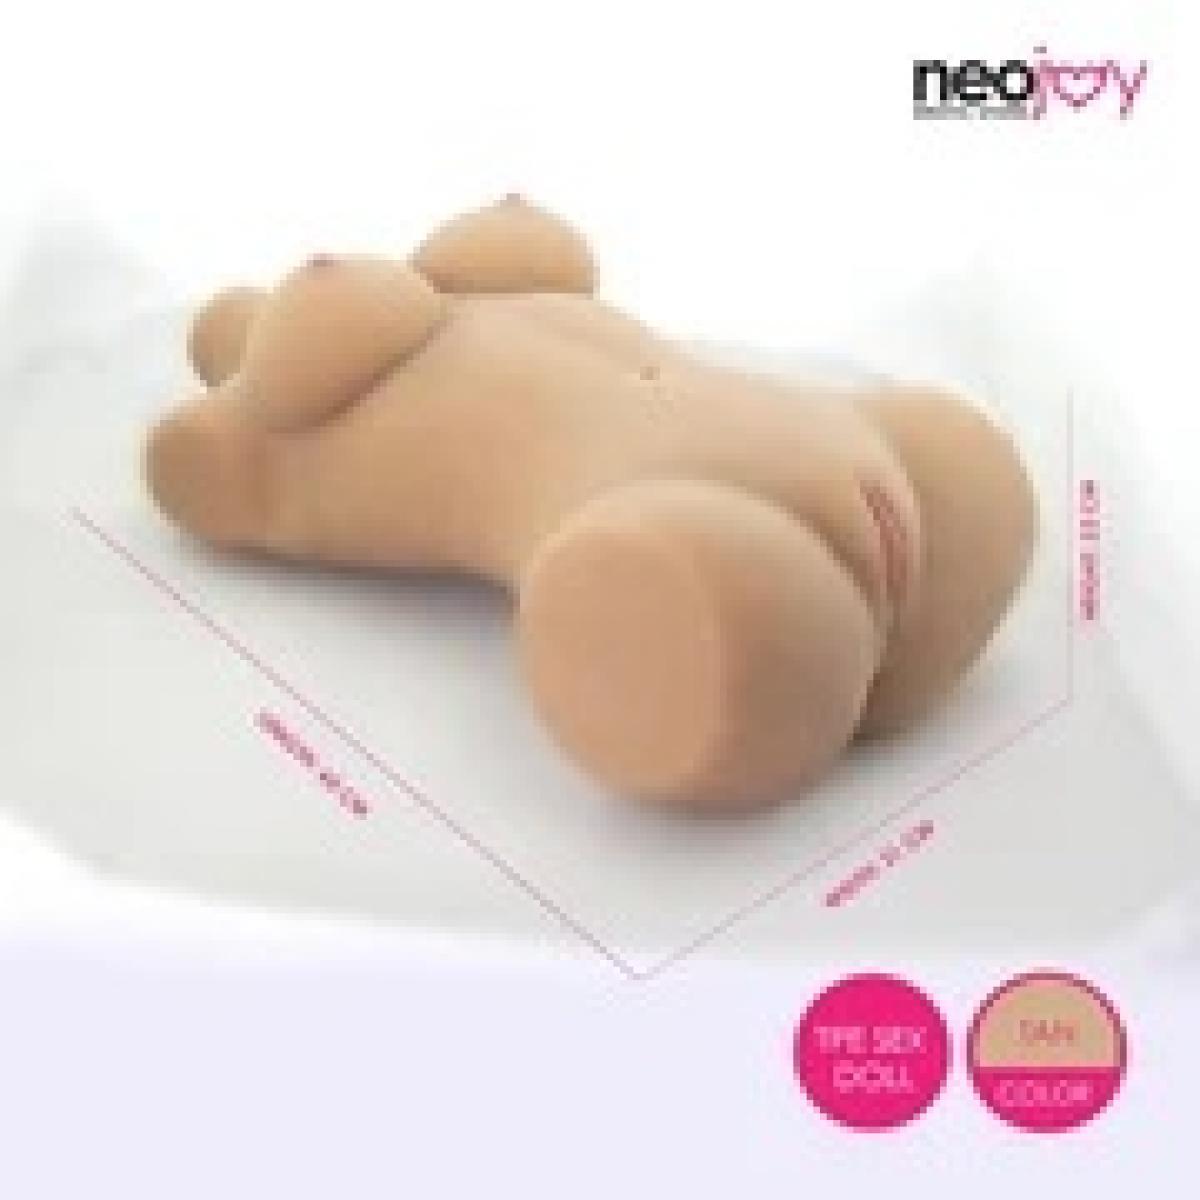 Neojoy Easy Torso With Girlfriend Mikayla Head - Realistic Sex Doll Torso With Head Connector - Tan - 17kg - Lucidtoys